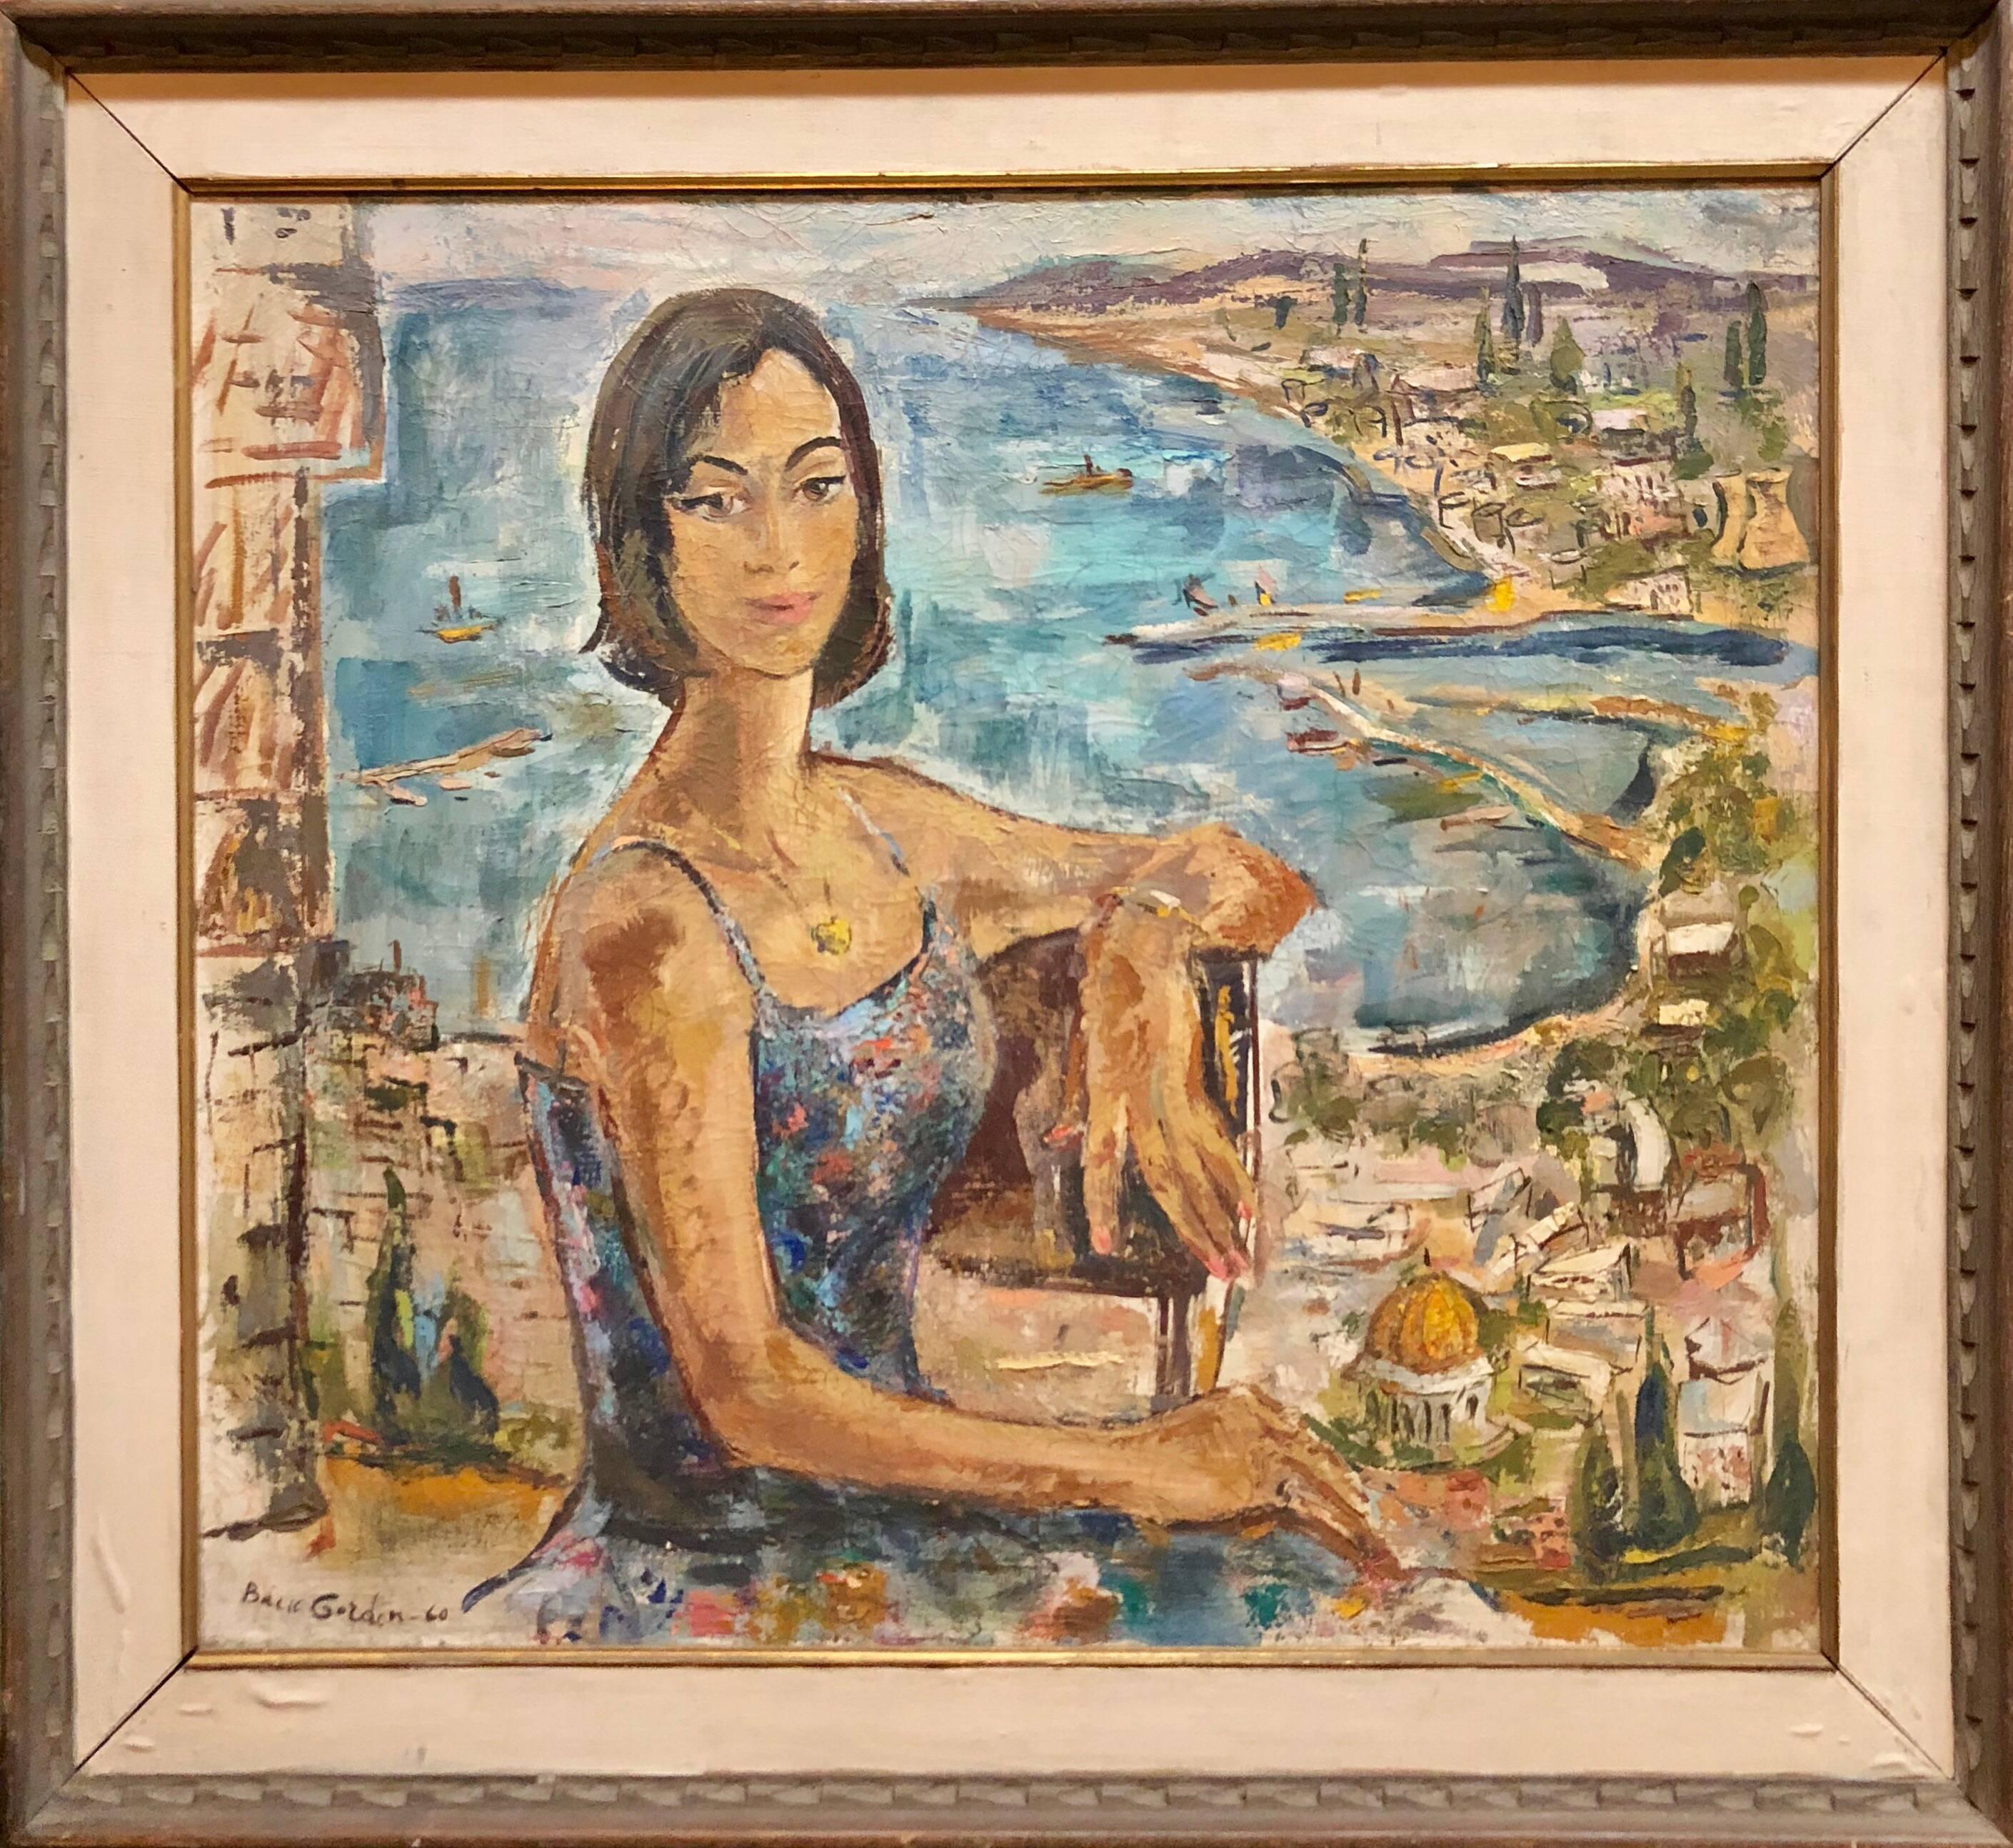 Genre: Classic
Subject: Portrait, Sabra in Haifa
Medium: Oil
Surface: Canvas
Country: United States


Bacia Gordon (1904-1977) came to the United States from Poland and studied at the Art Institute of Chicago. She traveled widely the United States,